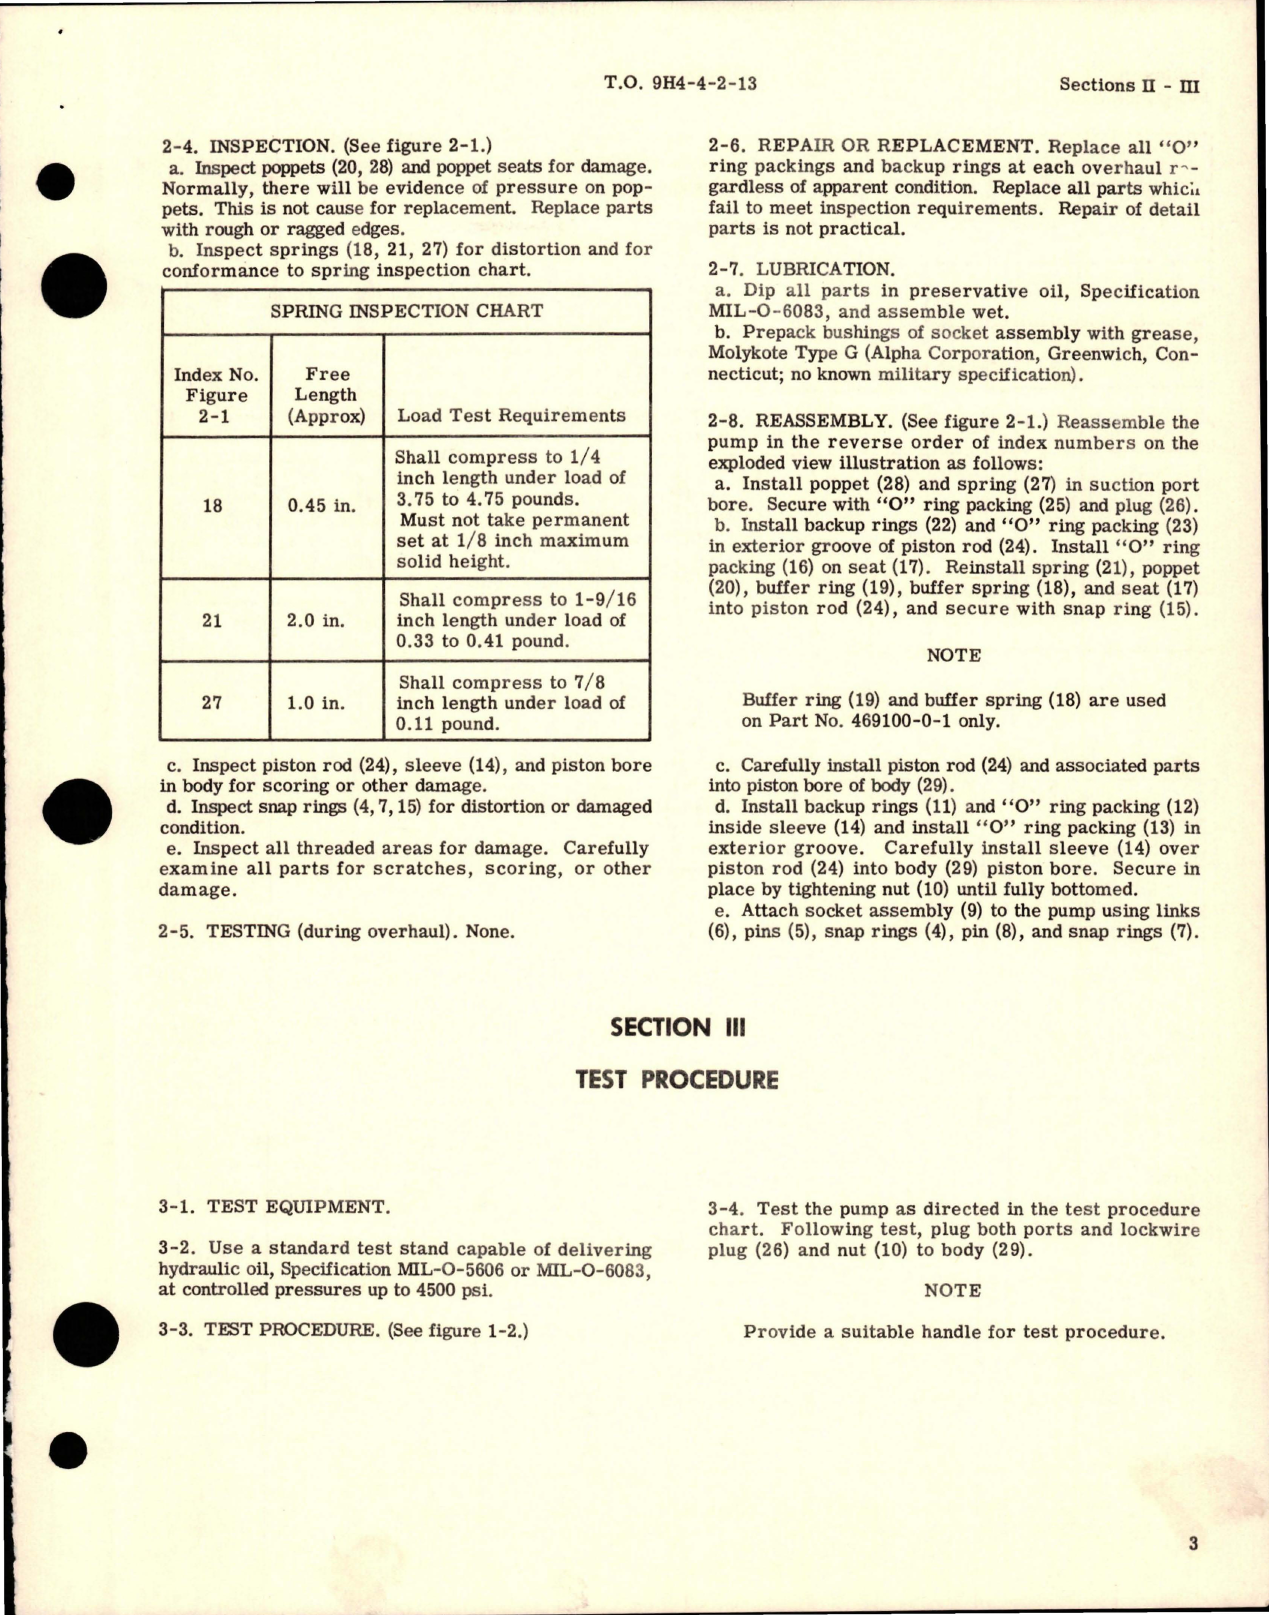 Sample page 5 from AirCorps Library document: Overhaul Instructions for Hydraulic Hand Pumps